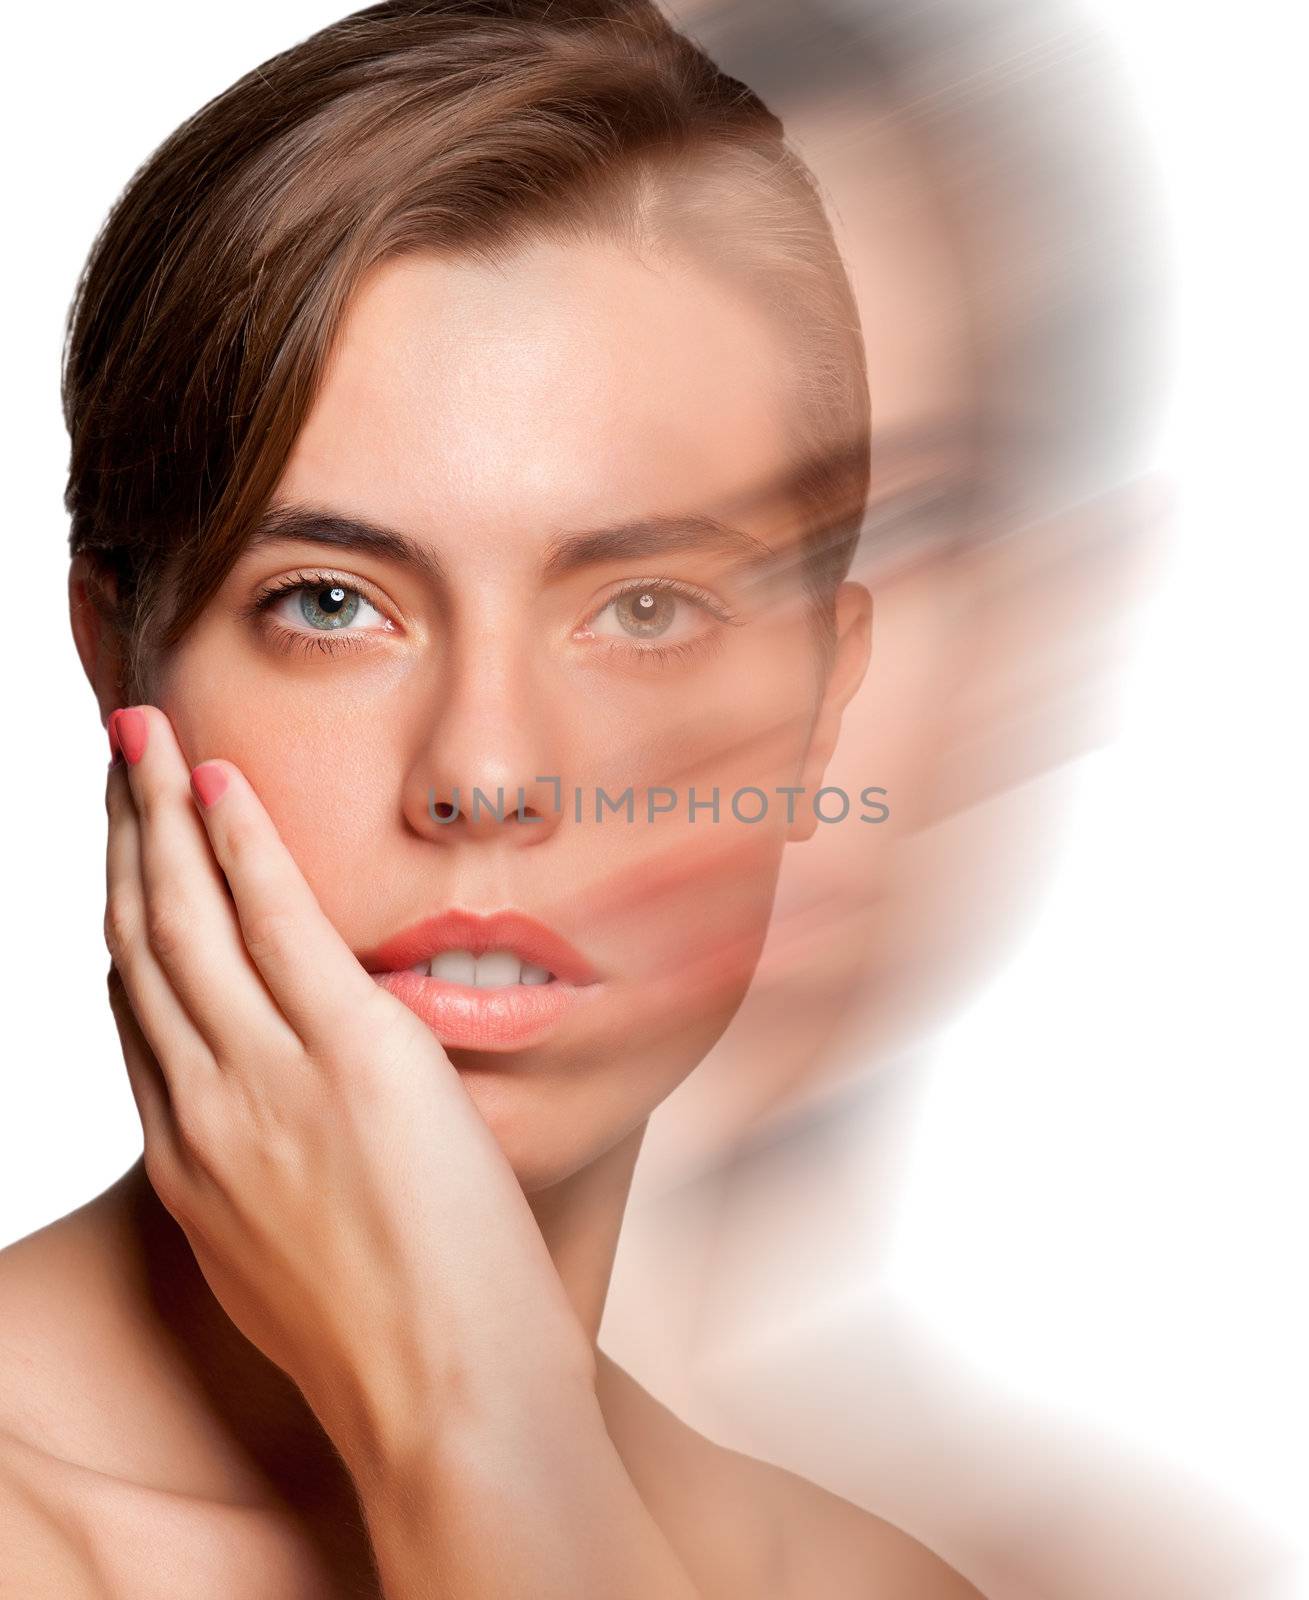 Portrait of young woman isolated on white background with a motion effect applied